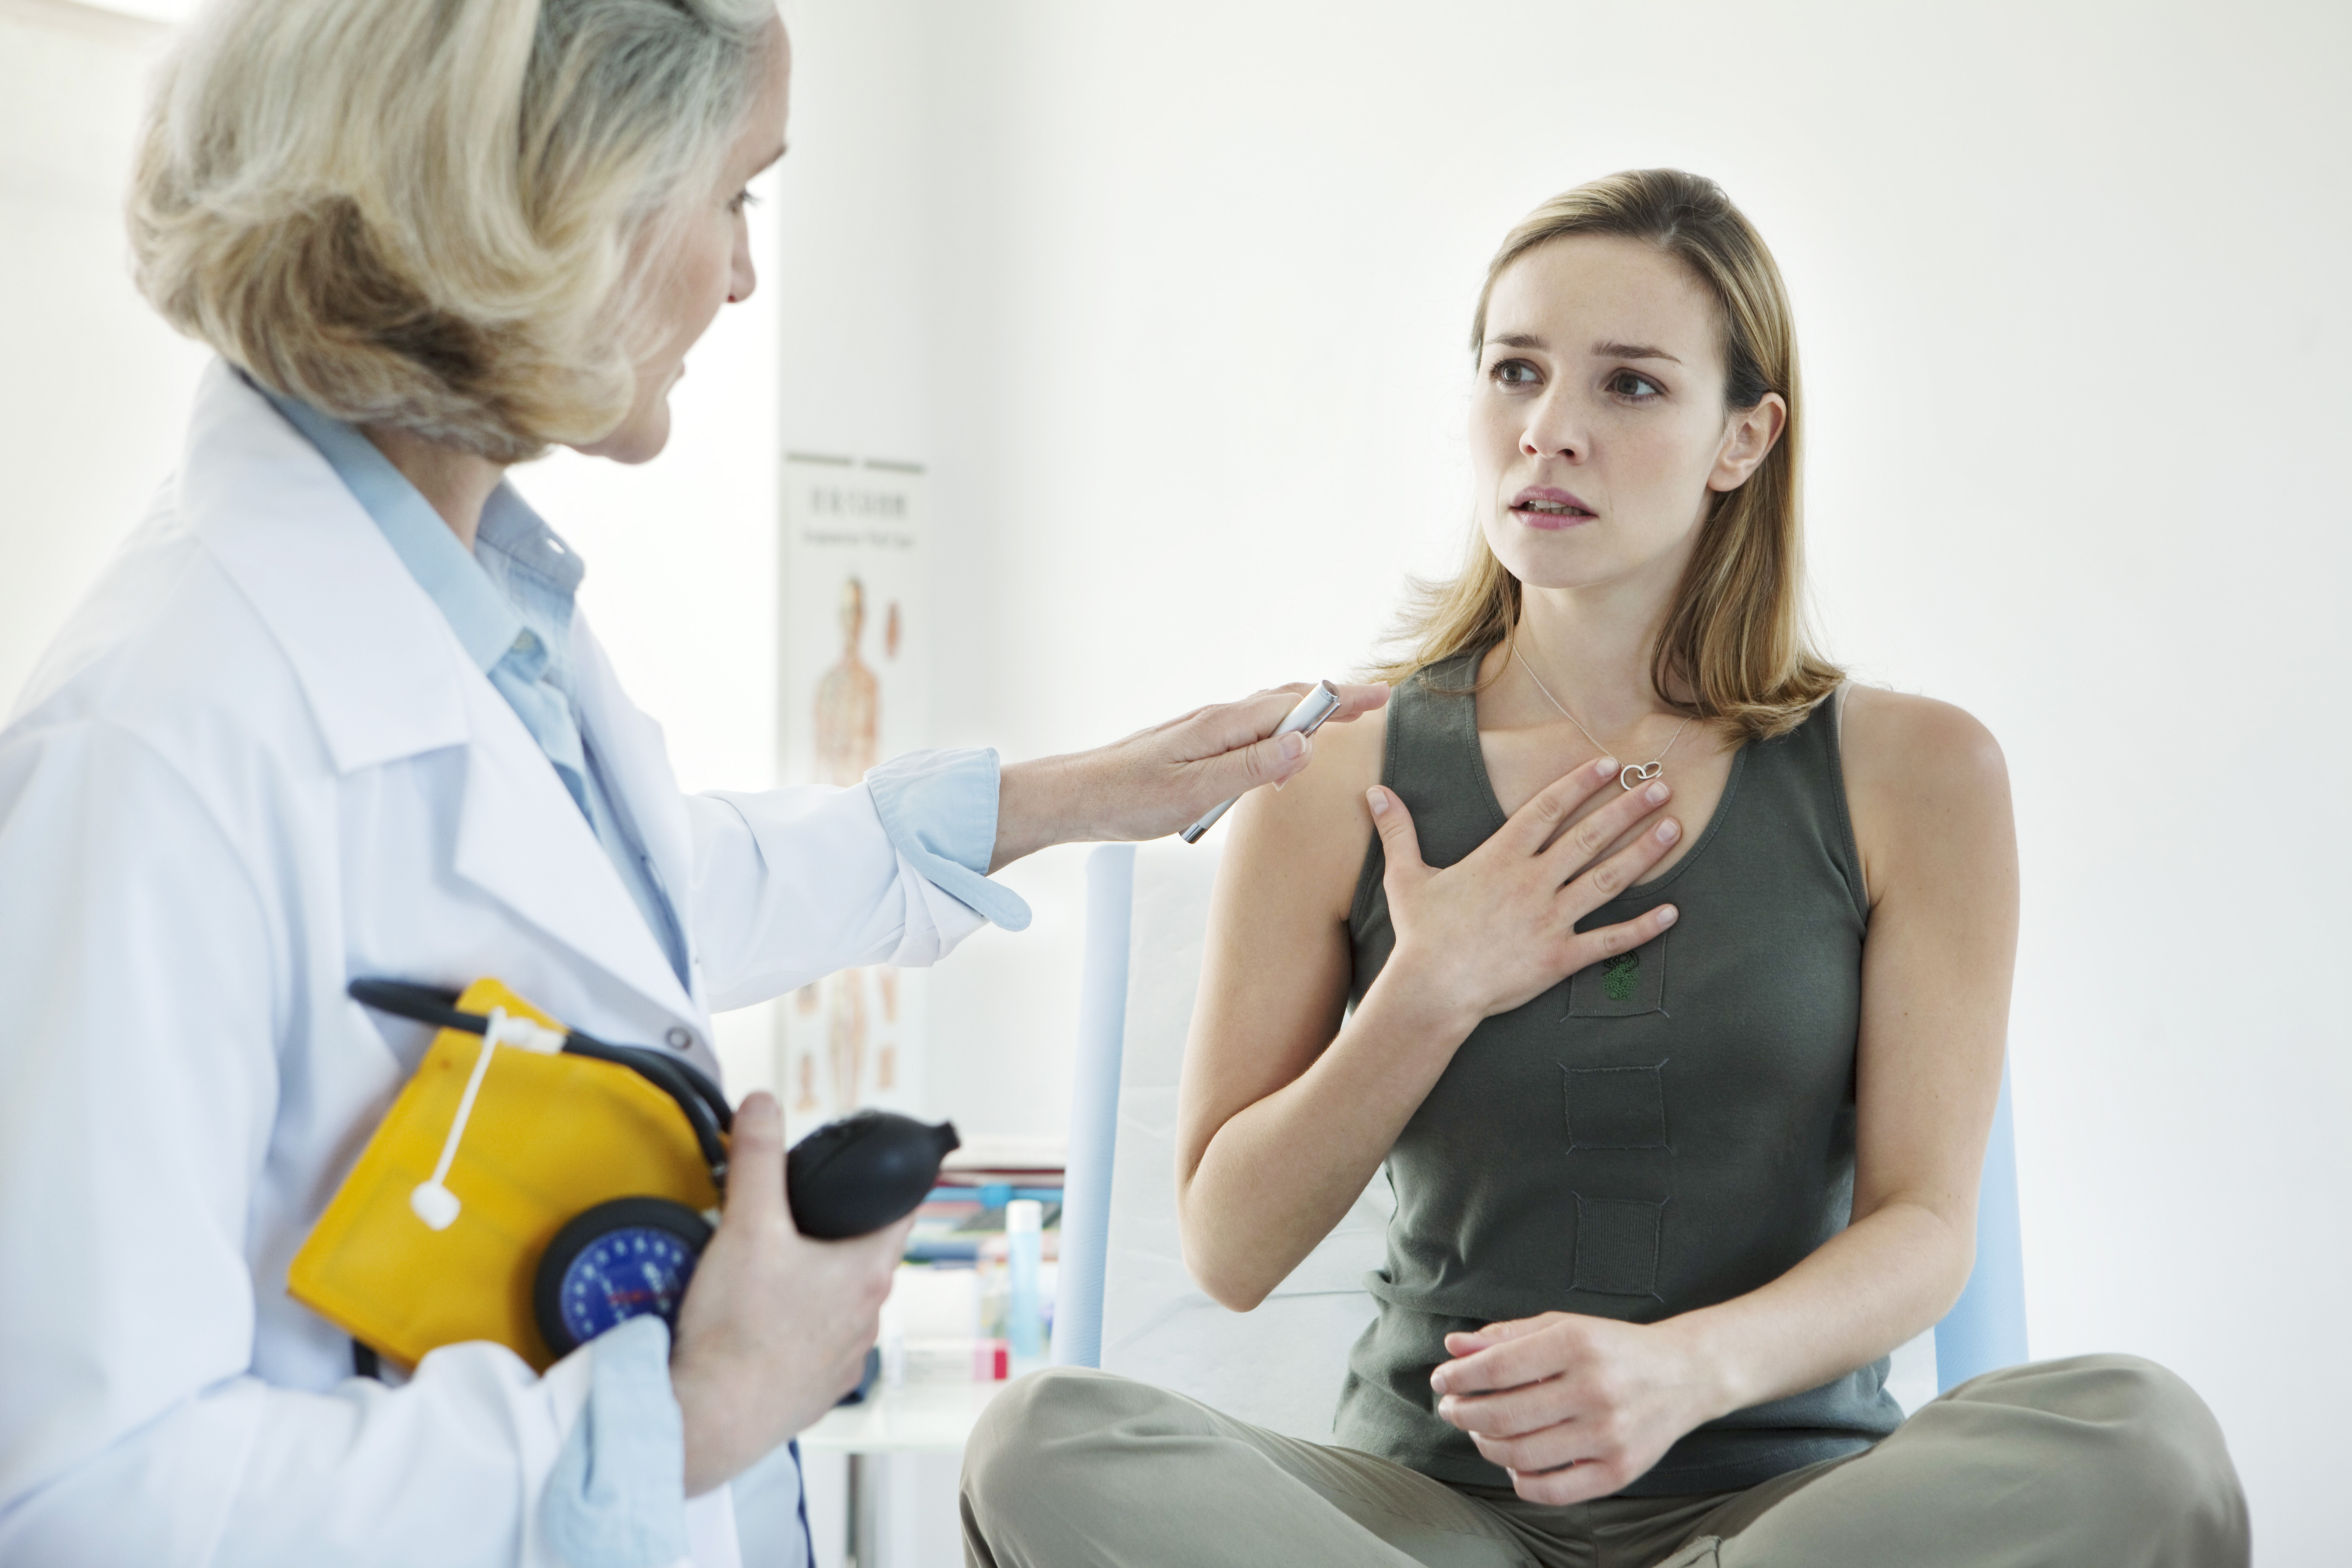 Foregoing Follow-Up Appointments with Pulmonologist Ups Risk of COPD Readmission, Study Shows